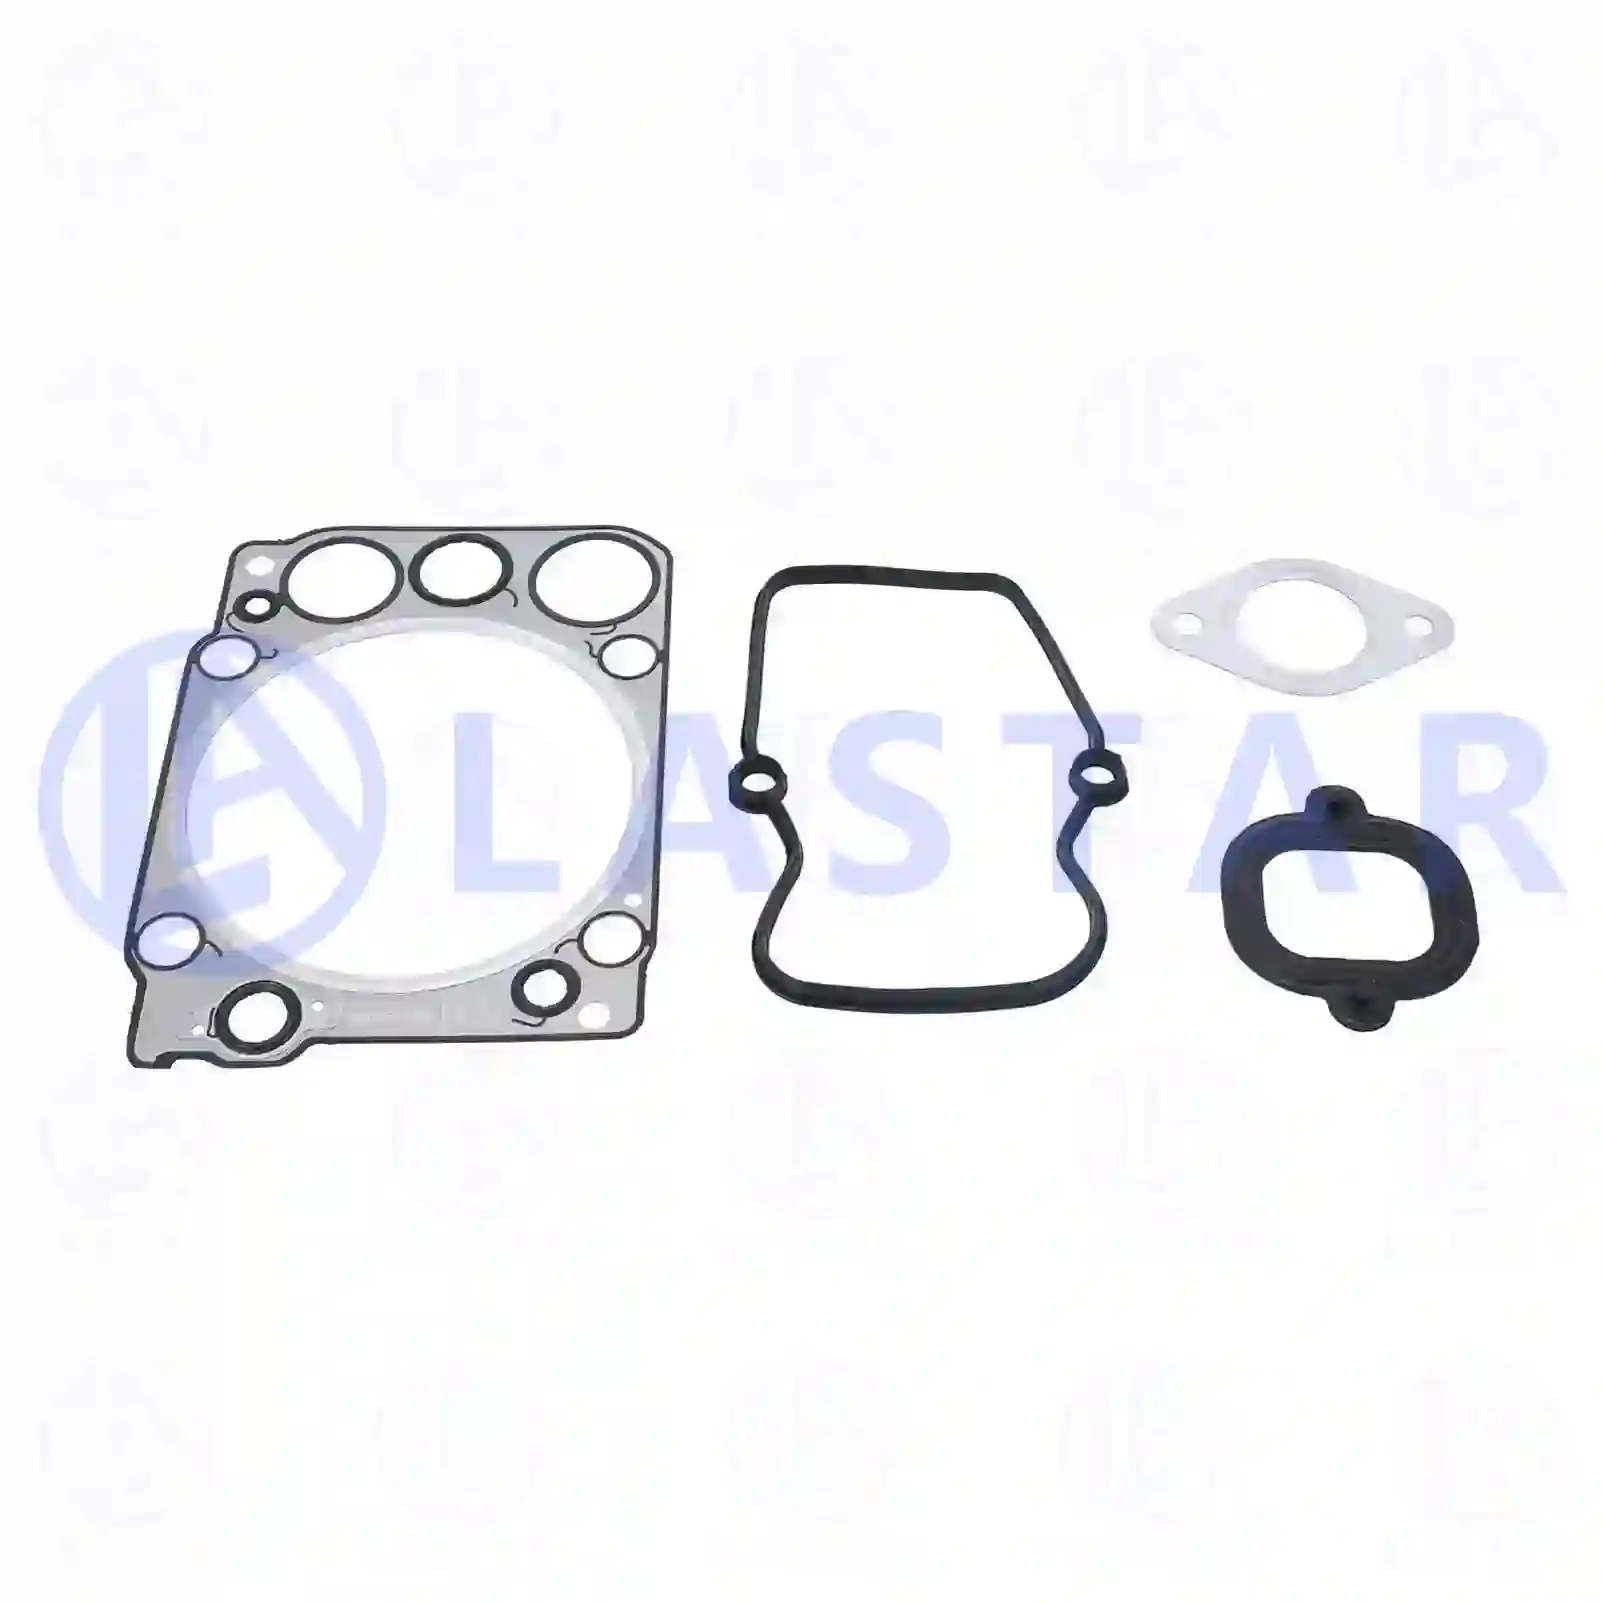 Cylinder head gasket kit, 77702693, 4570160221S2, 4601420080S2, 5410101621S2, 5410161720S2, 5410980480S2 ||  77702693 Lastar Spare Part | Truck Spare Parts, Auotomotive Spare Parts Cylinder head gasket kit, 77702693, 4570160221S2, 4601420080S2, 5410101621S2, 5410161720S2, 5410980480S2 ||  77702693 Lastar Spare Part | Truck Spare Parts, Auotomotive Spare Parts